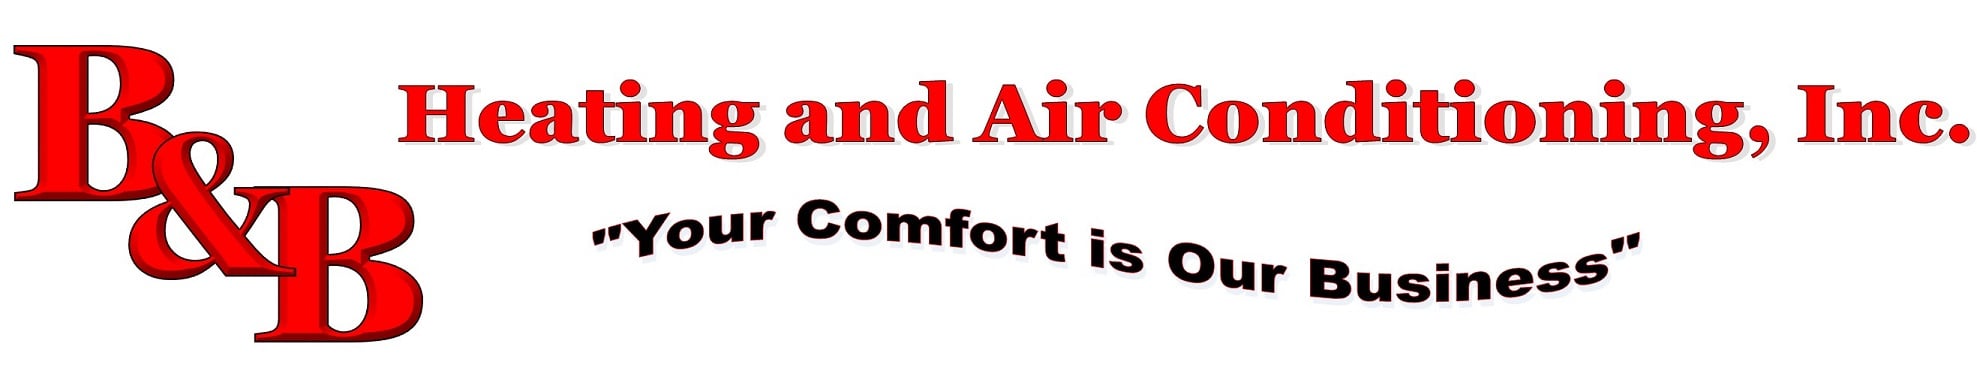 B&B's Heating and Air Conditioning, Inc. Logo